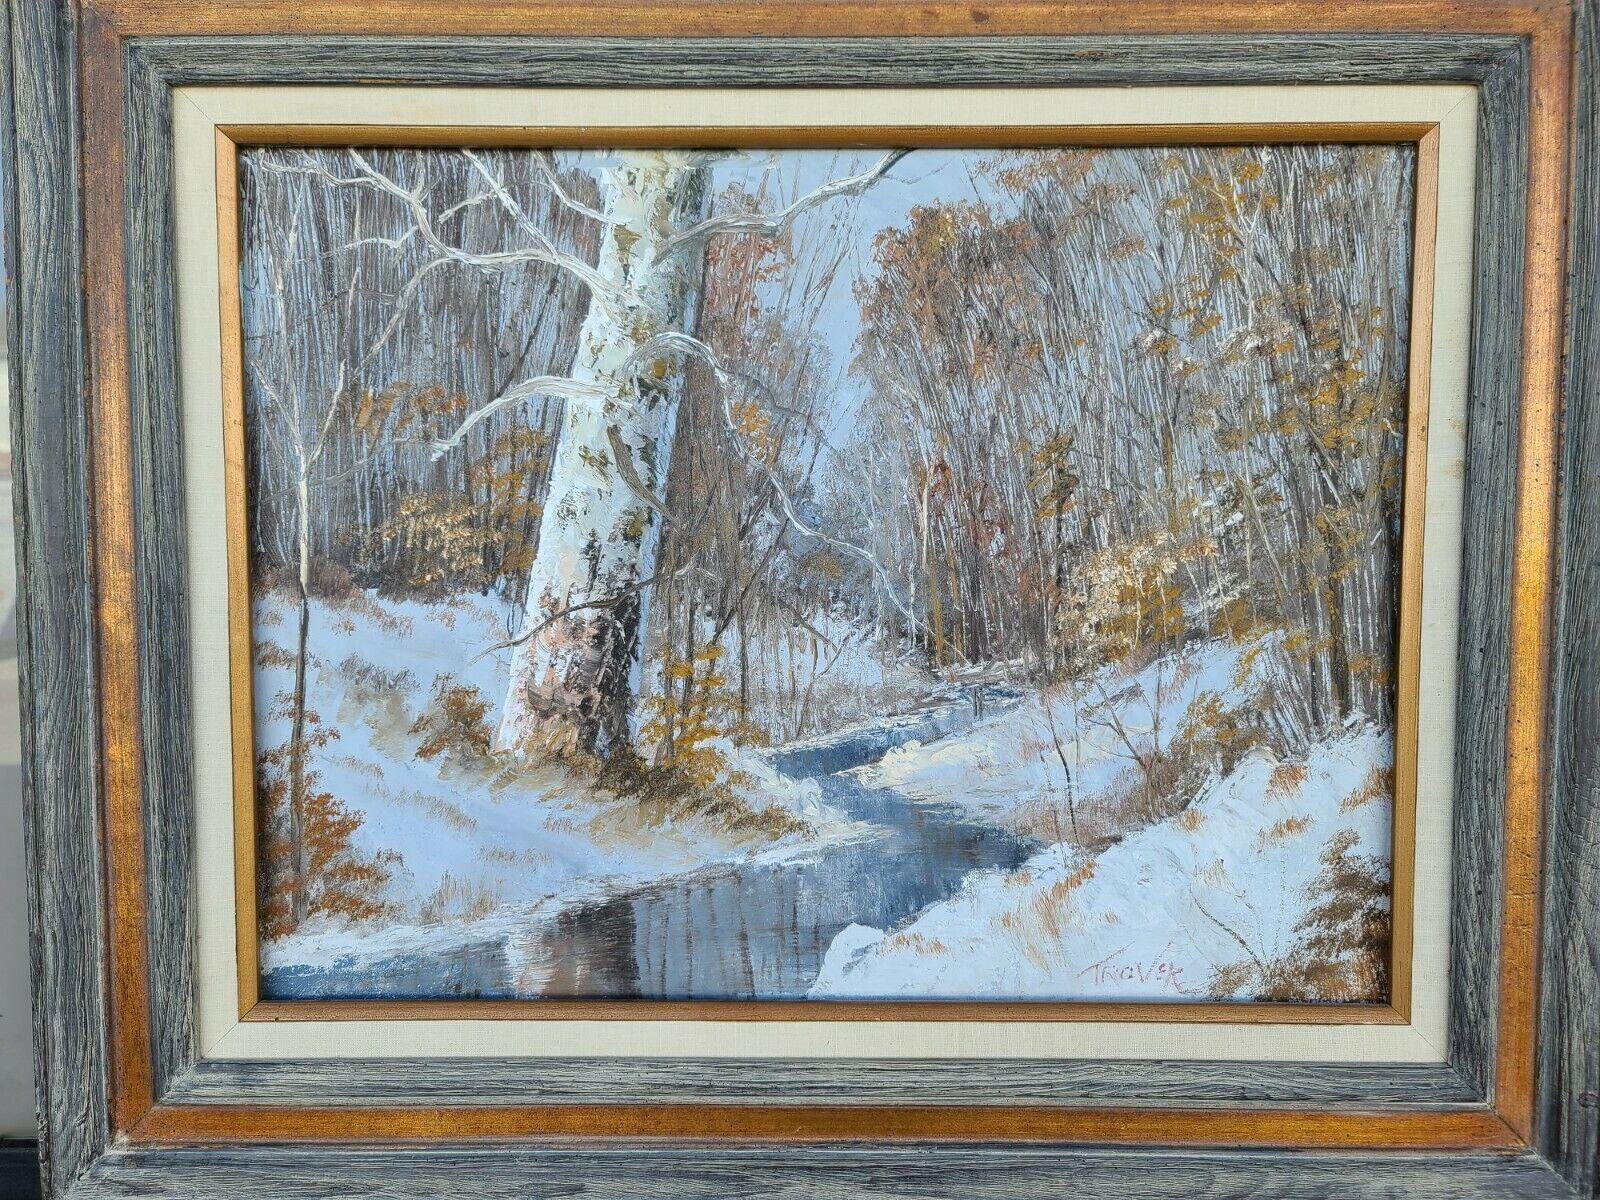 Canvas Original Signed Joseph Trover Oil Painting of Winter Landscape For Sale